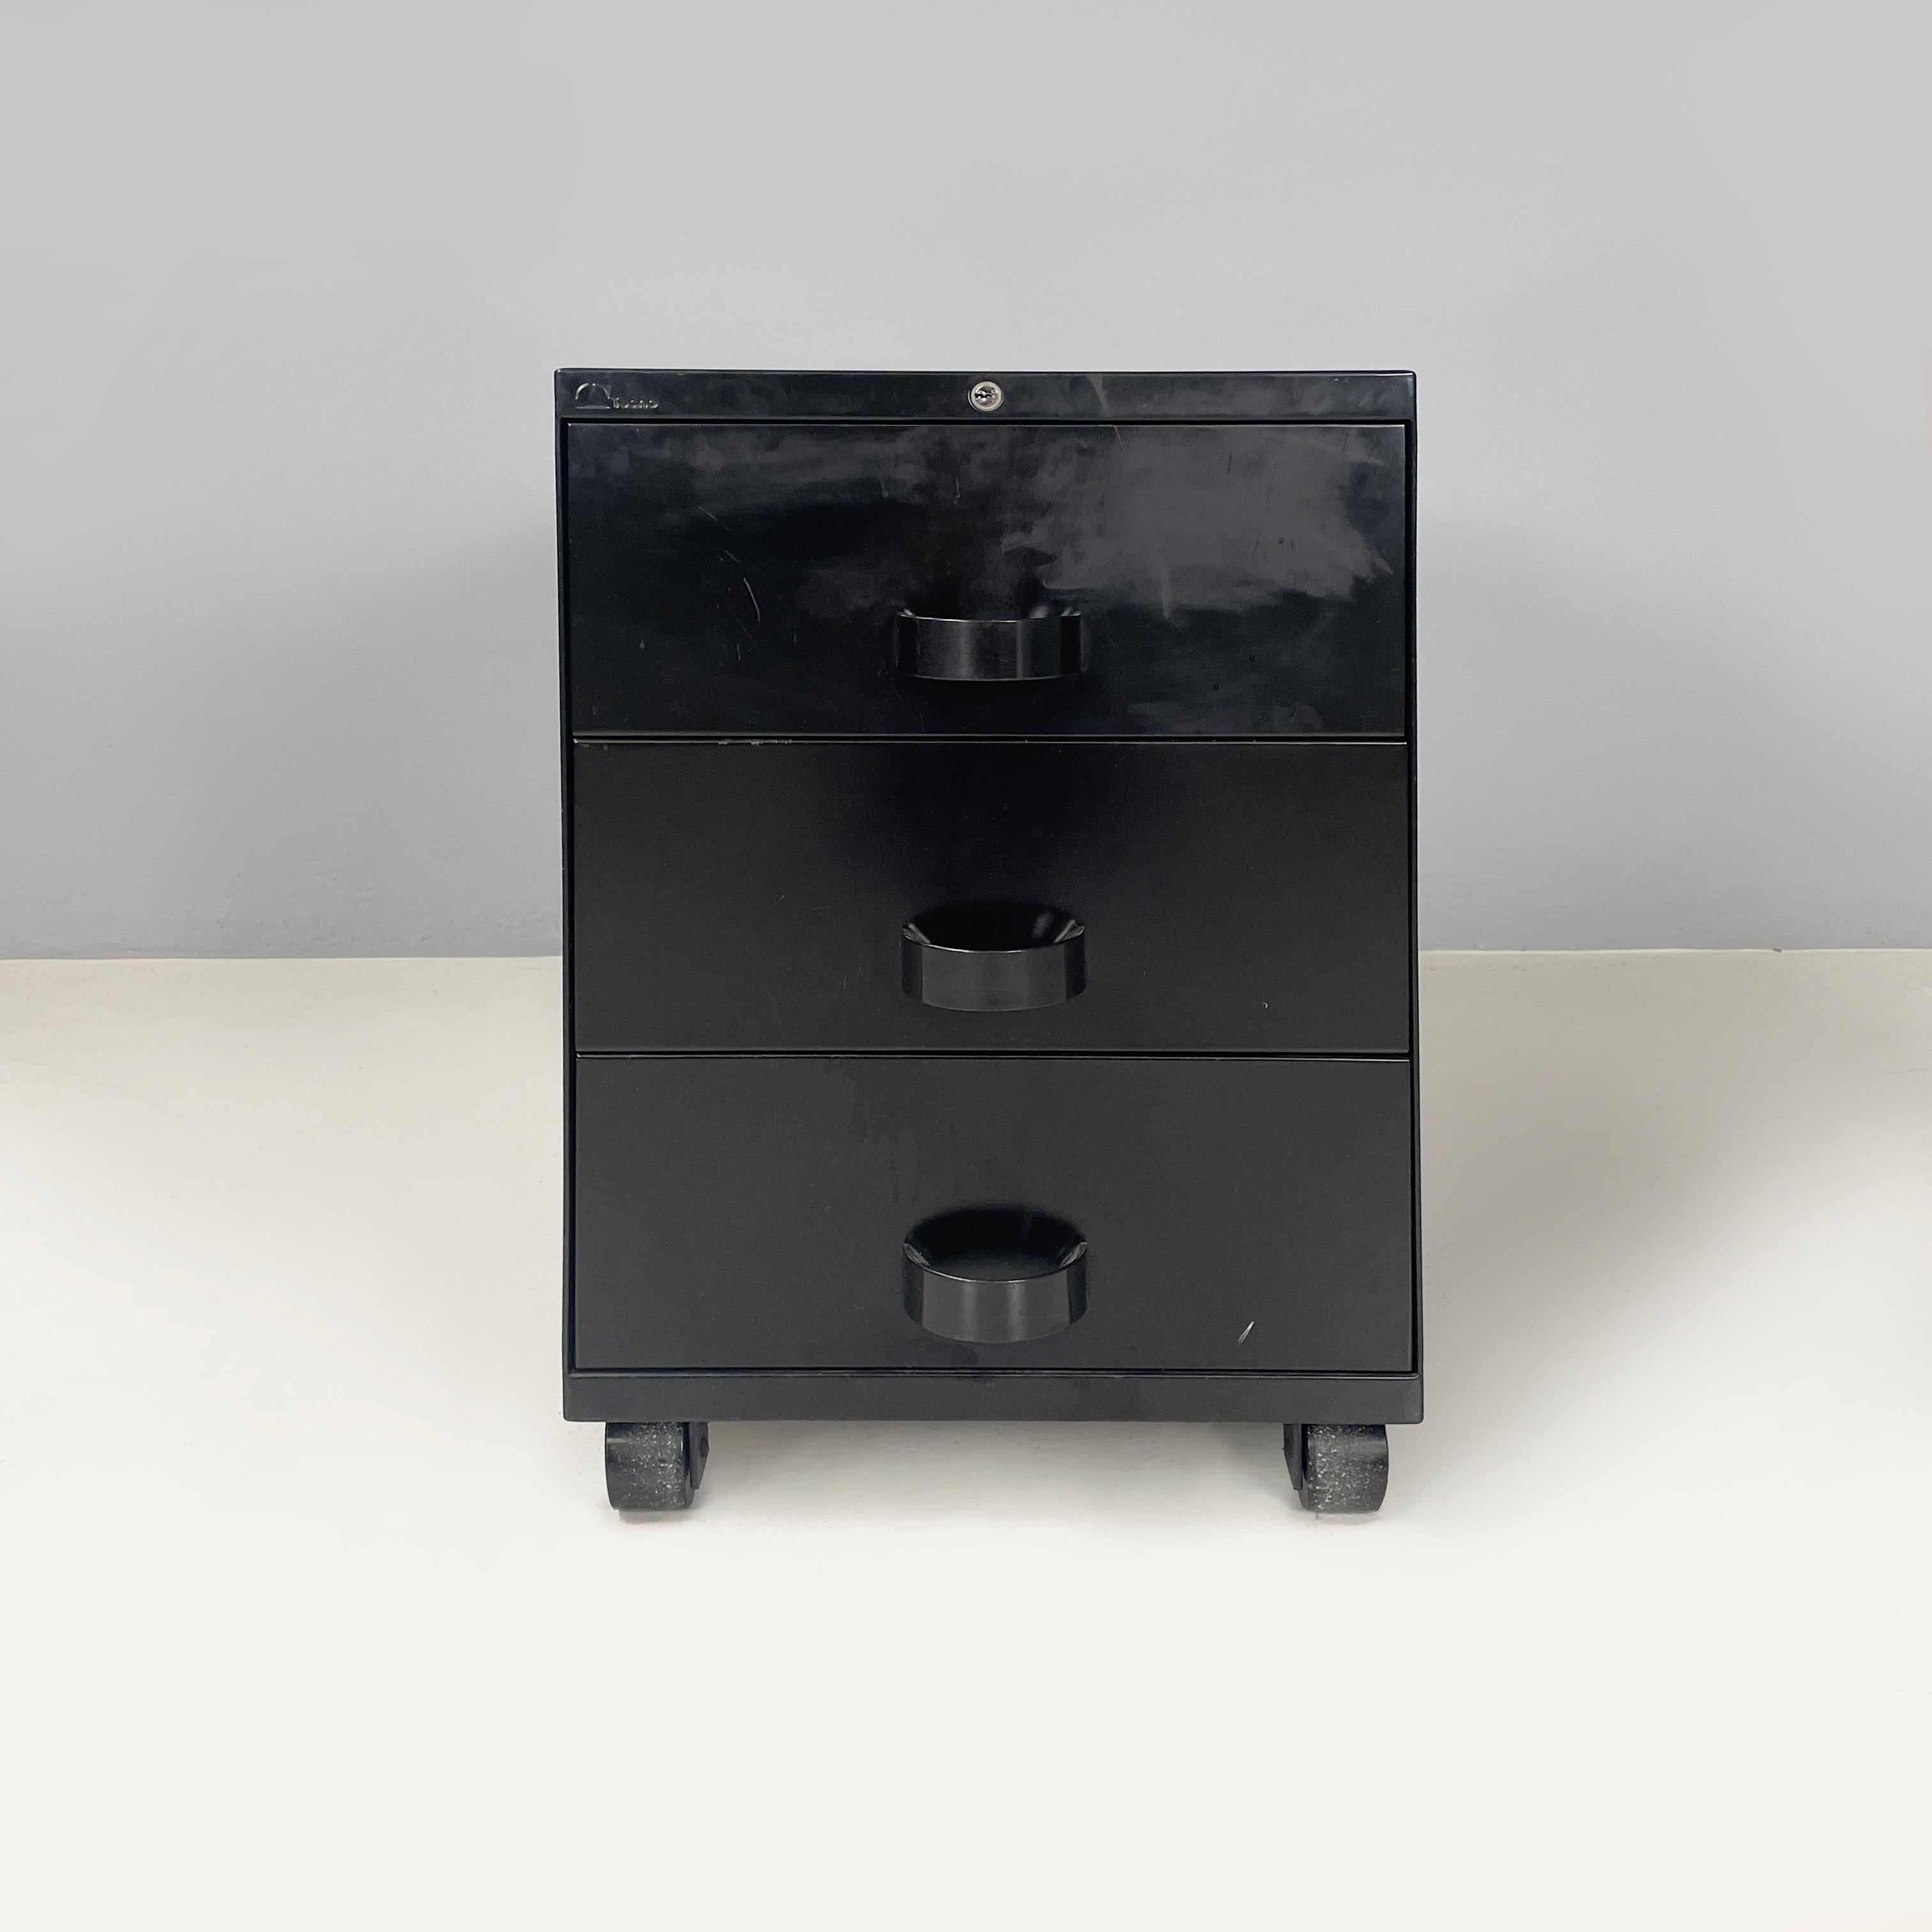 Italian mid-century modern Black Office drawer unit by Osvaldo Borsani and Eugenio Gerli for Tecno, 1970s
Office drawer unit with rectangular base in black painted metal. On the front it has 3 large drawers with semicircular handles. At the base it